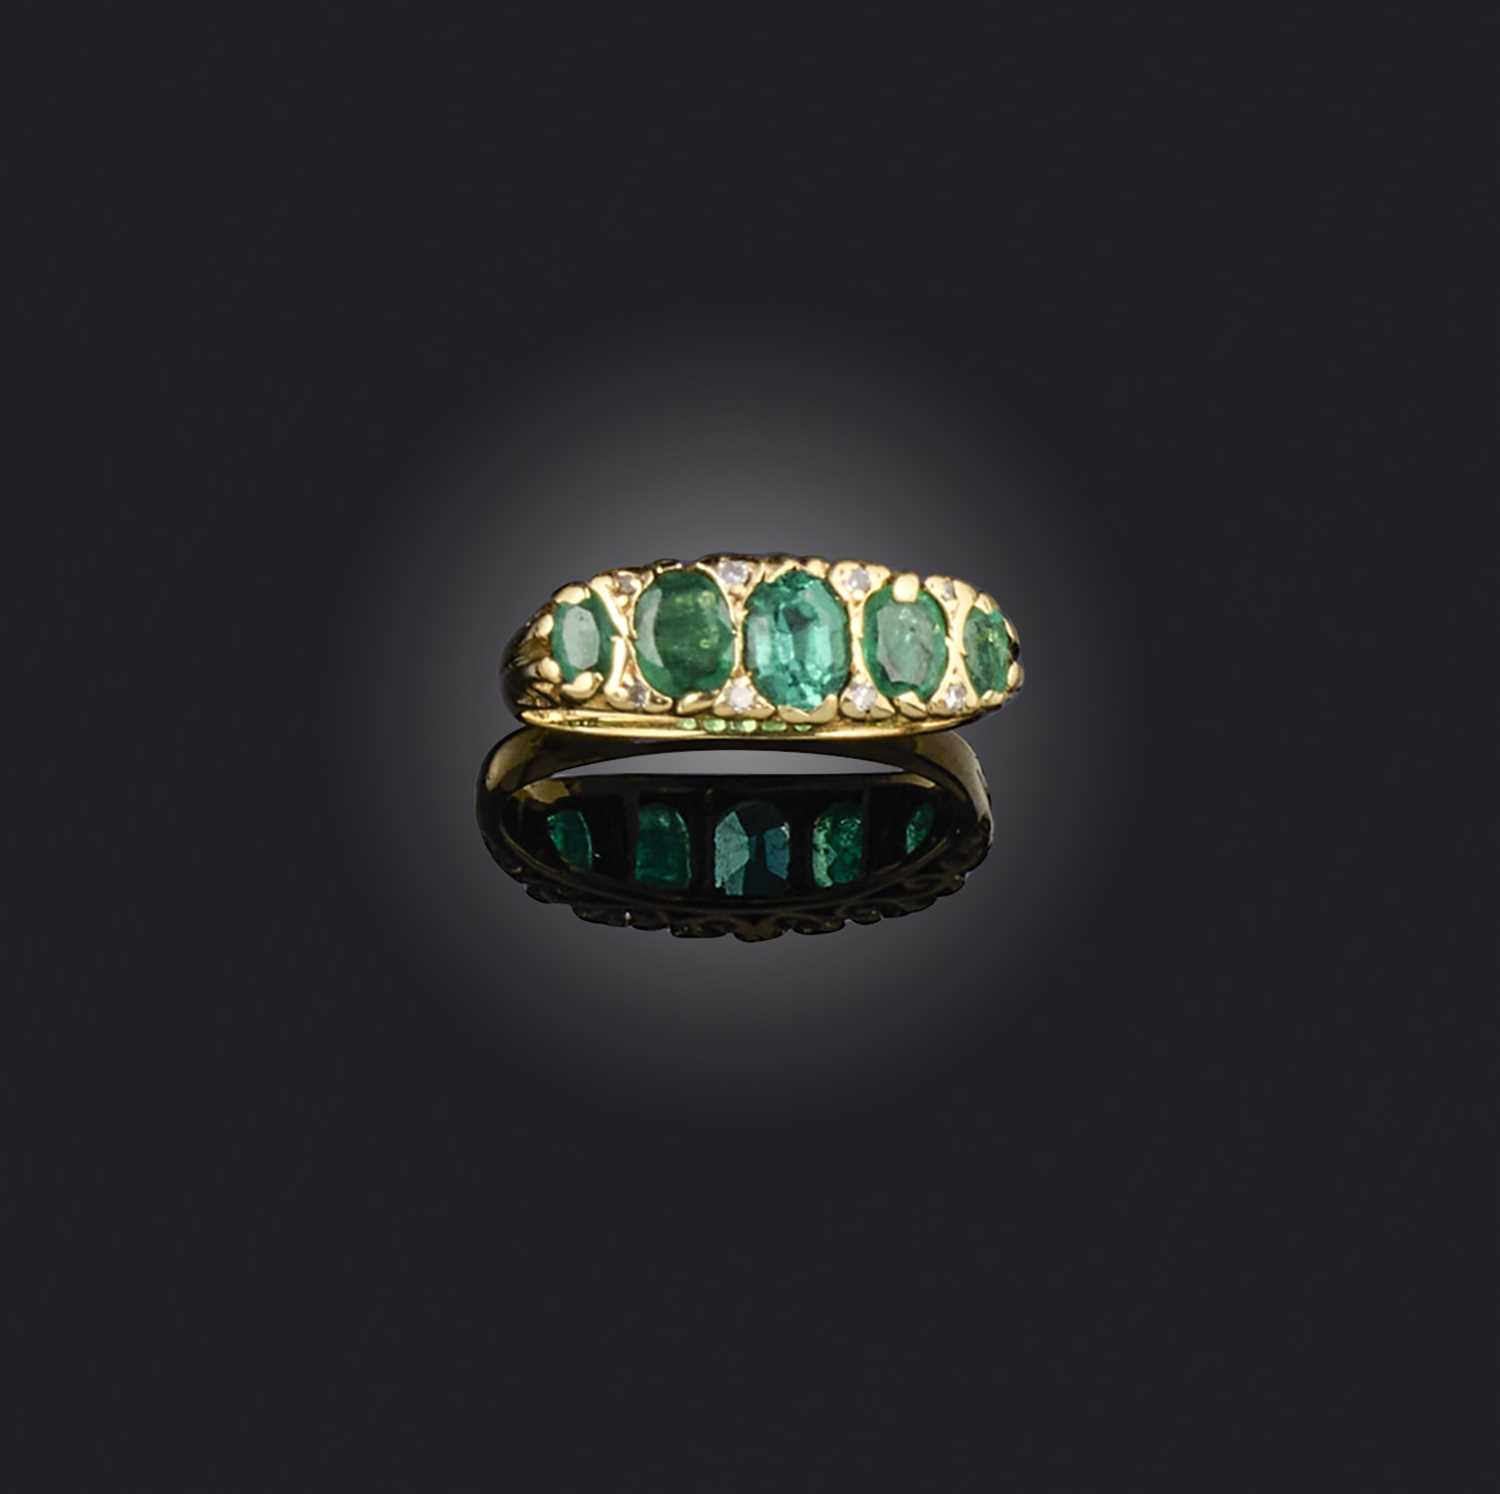 An emerald and diamond ring, set with oval emeralds, spaced by small single-cut diamonds, to a